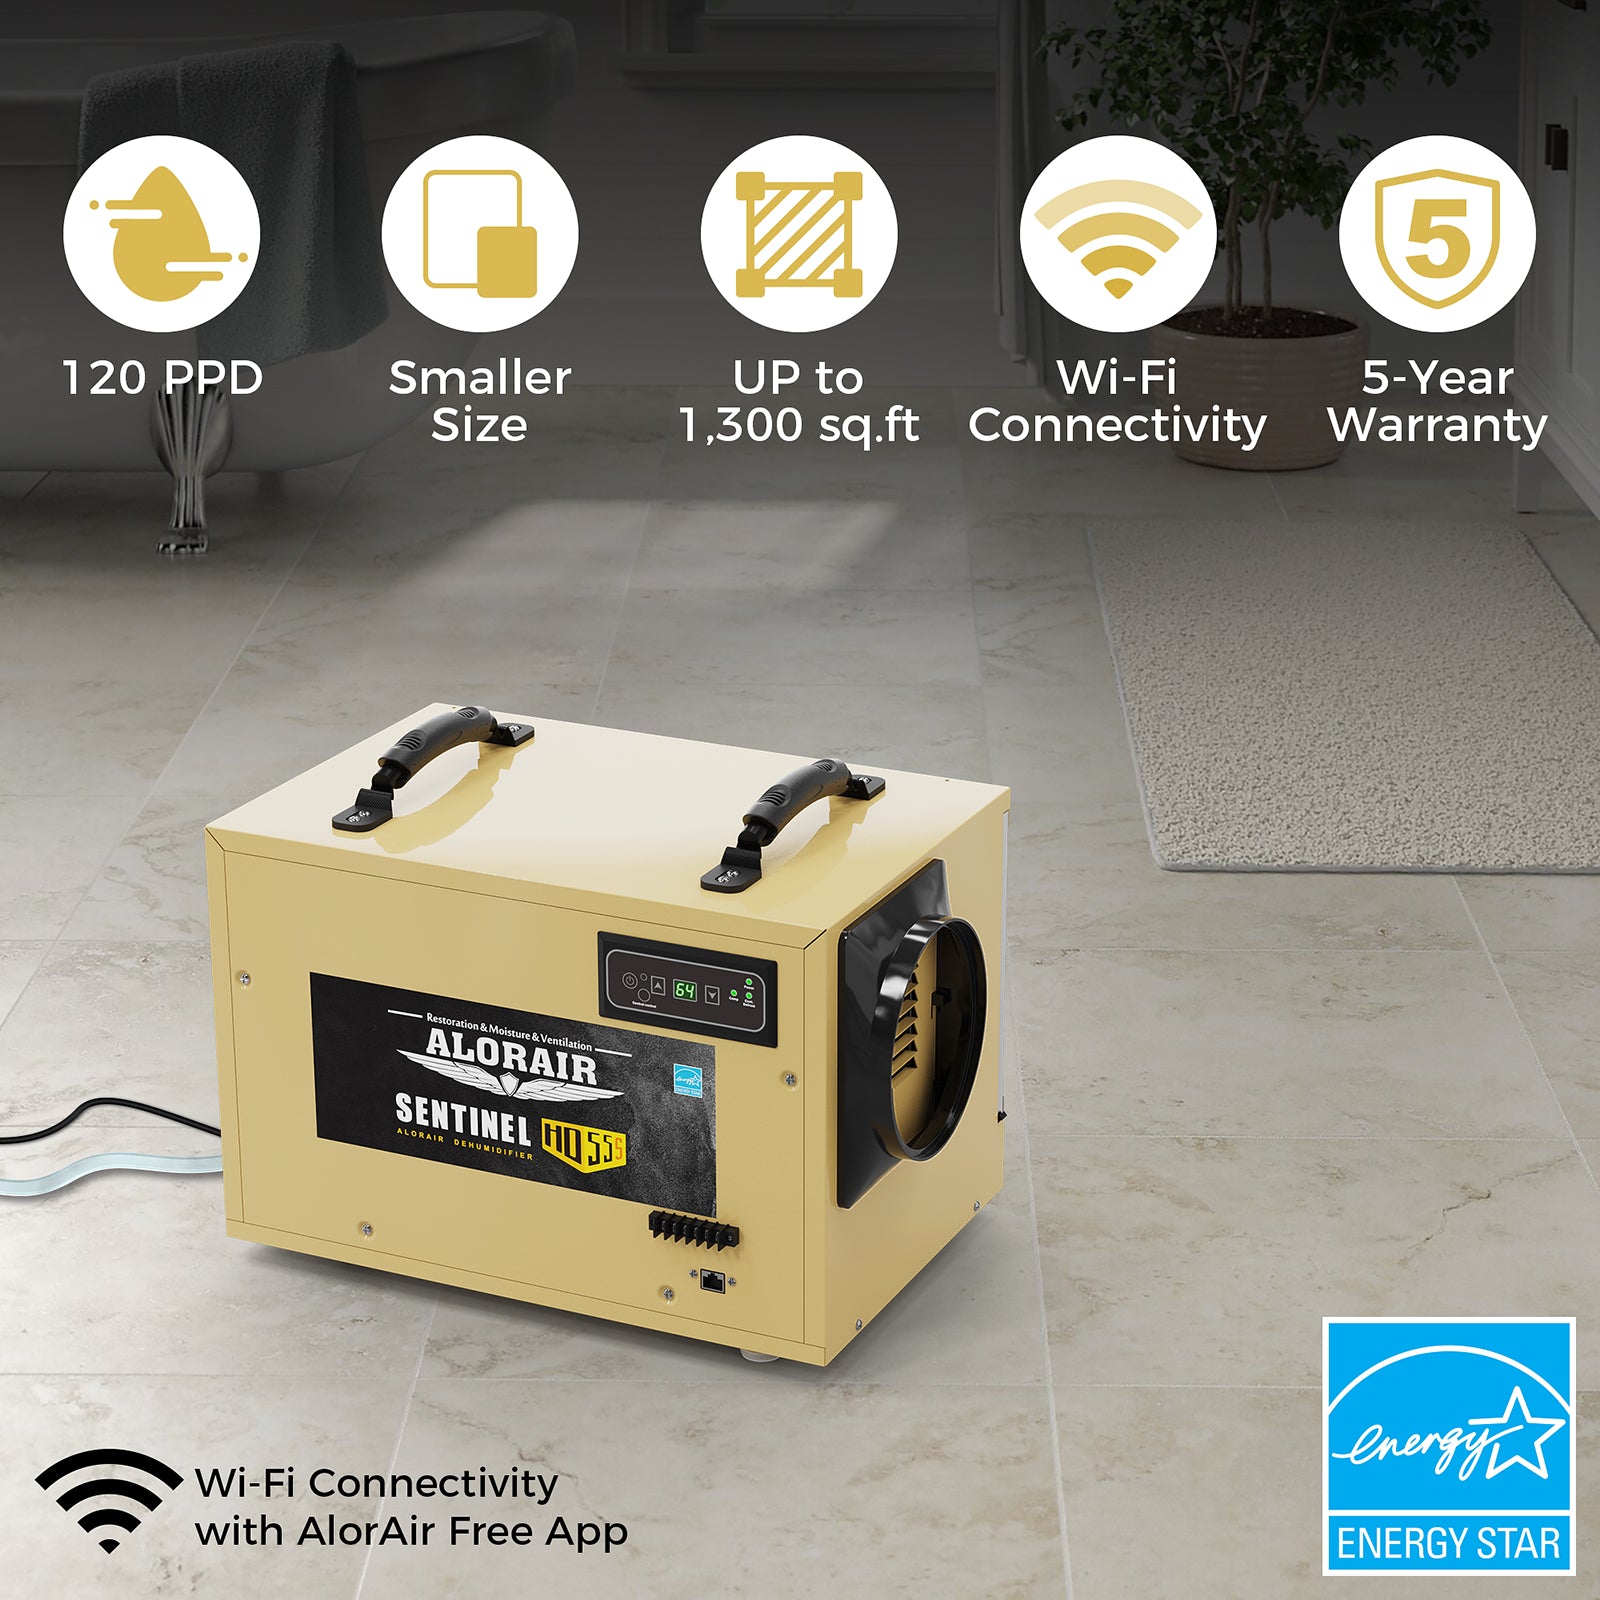 ALORAIR 120 PPD Commercial Dehumidifier, with Drain Hose for Crawl Spaces (Yellow) | Sentinel HD55S